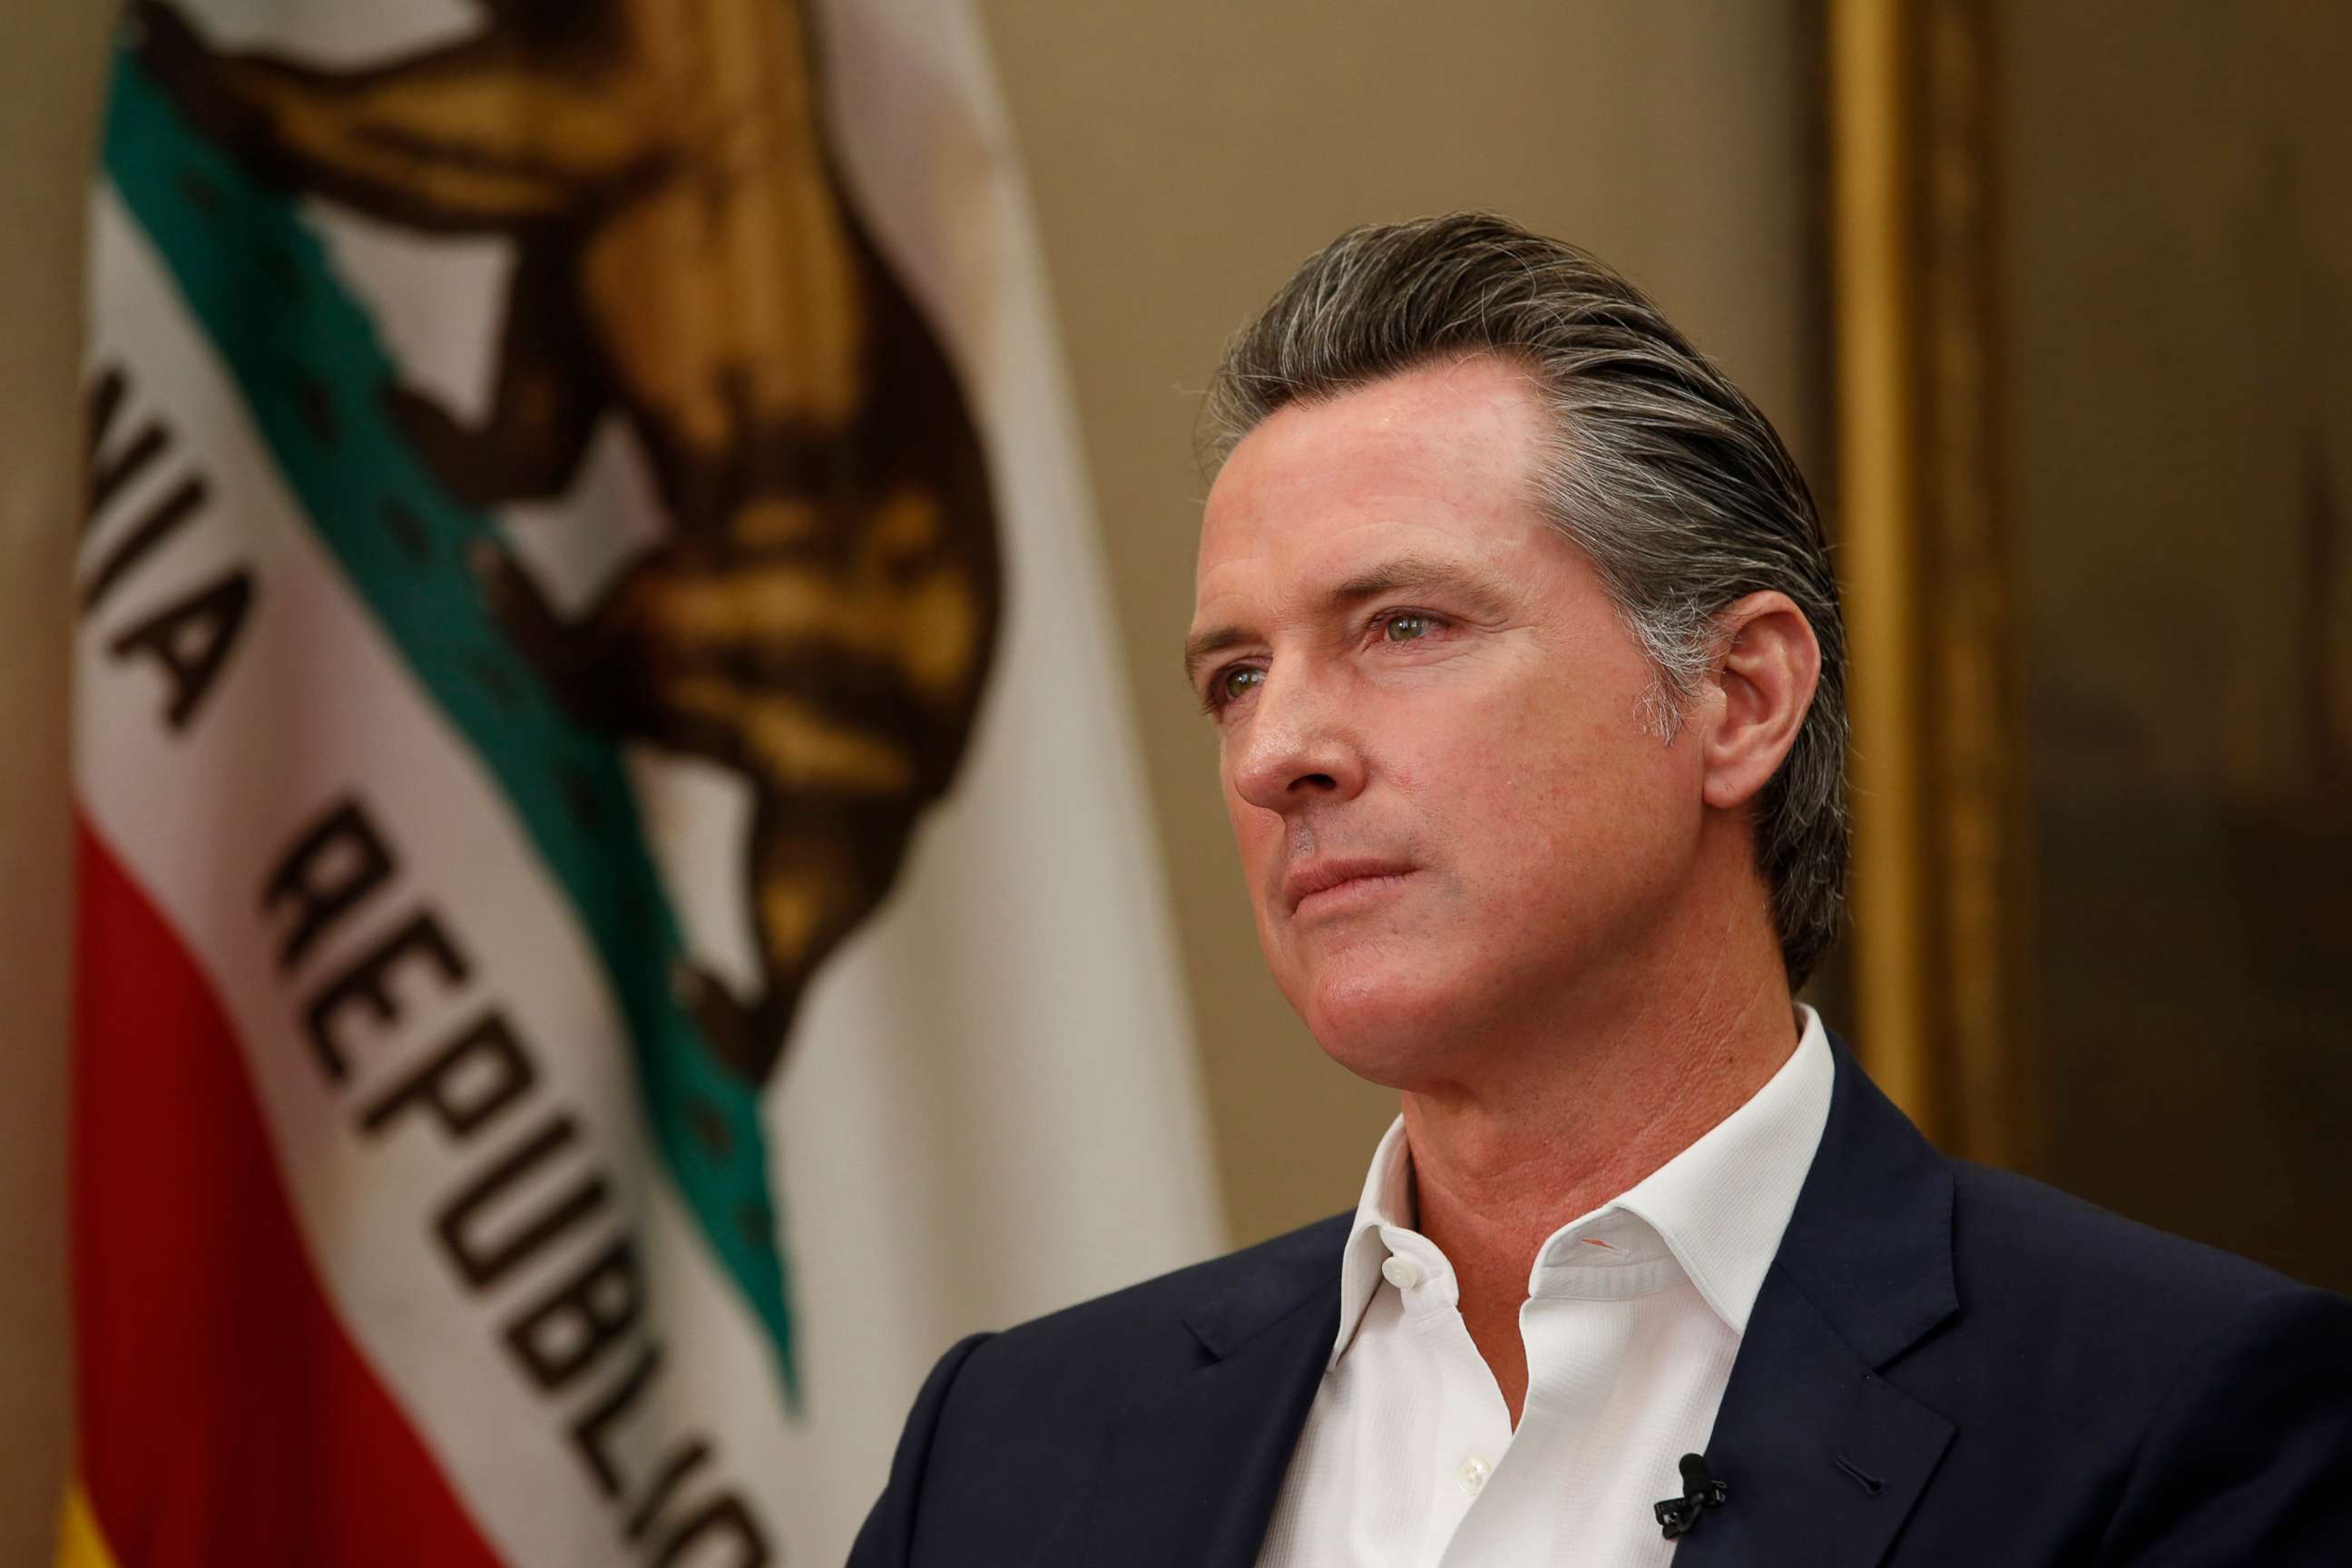 PHOTO: California Gov. Gavin Newsom listens to a question during an interview in Sacramento, Calif., Oct. 8, 2019.